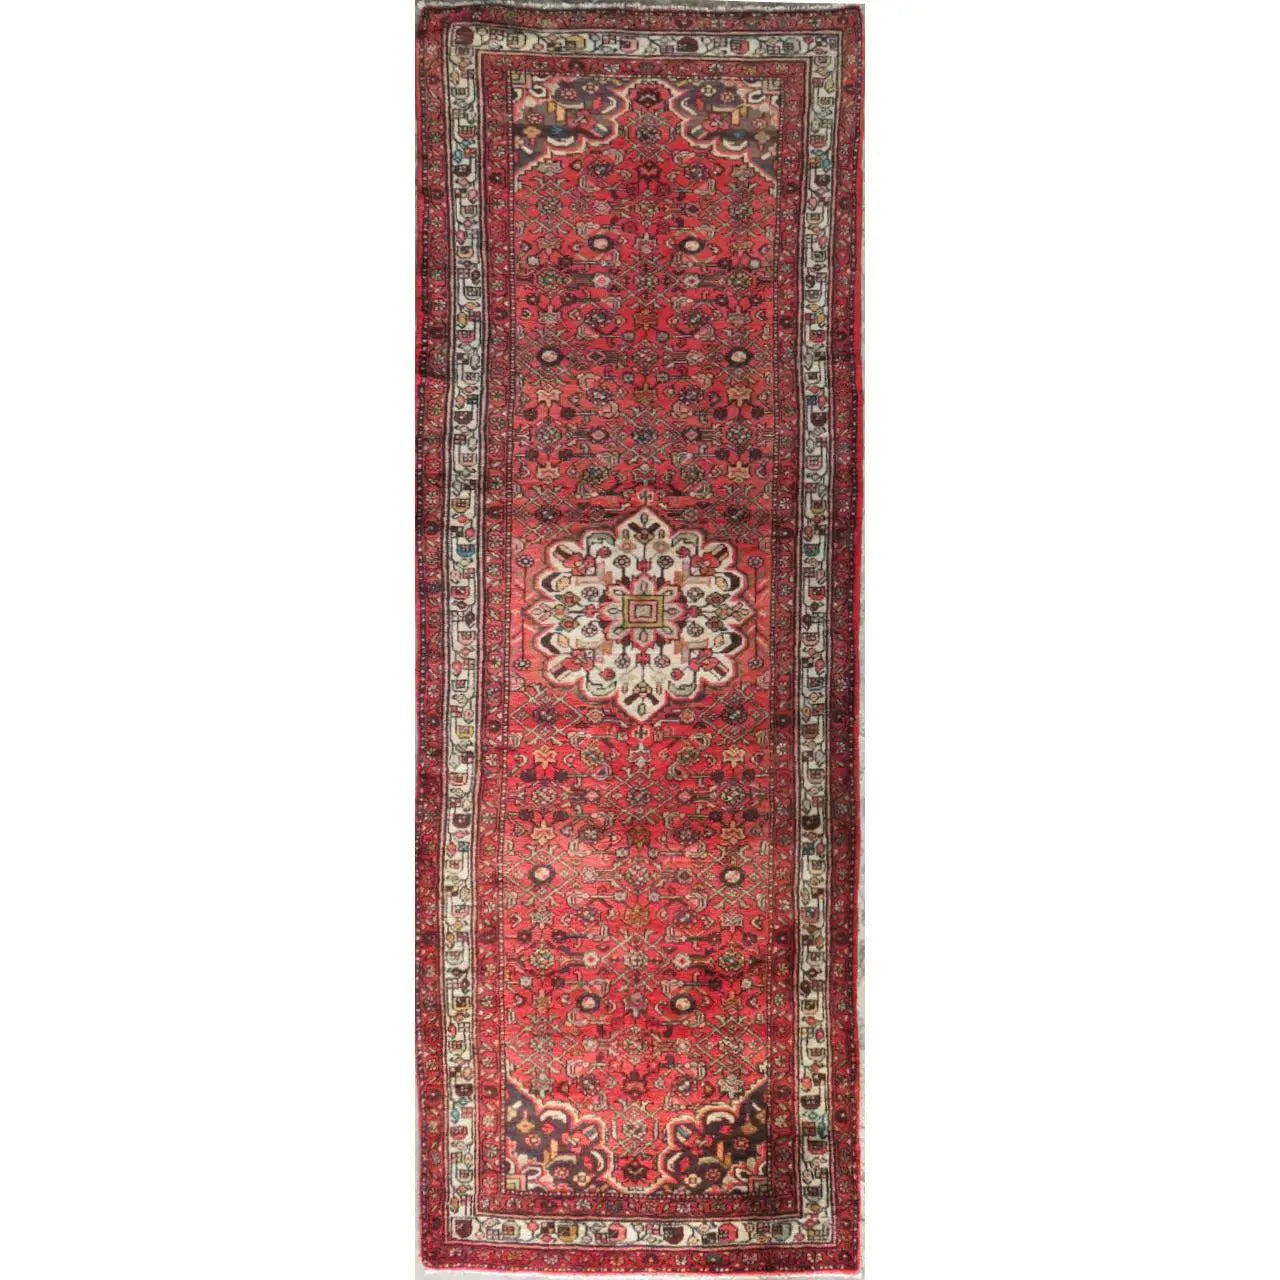 Hand-Knotted Persian Wool Rug _ Luxurious Vintage Design, 11'6" x 3'5", Artisan Crafted